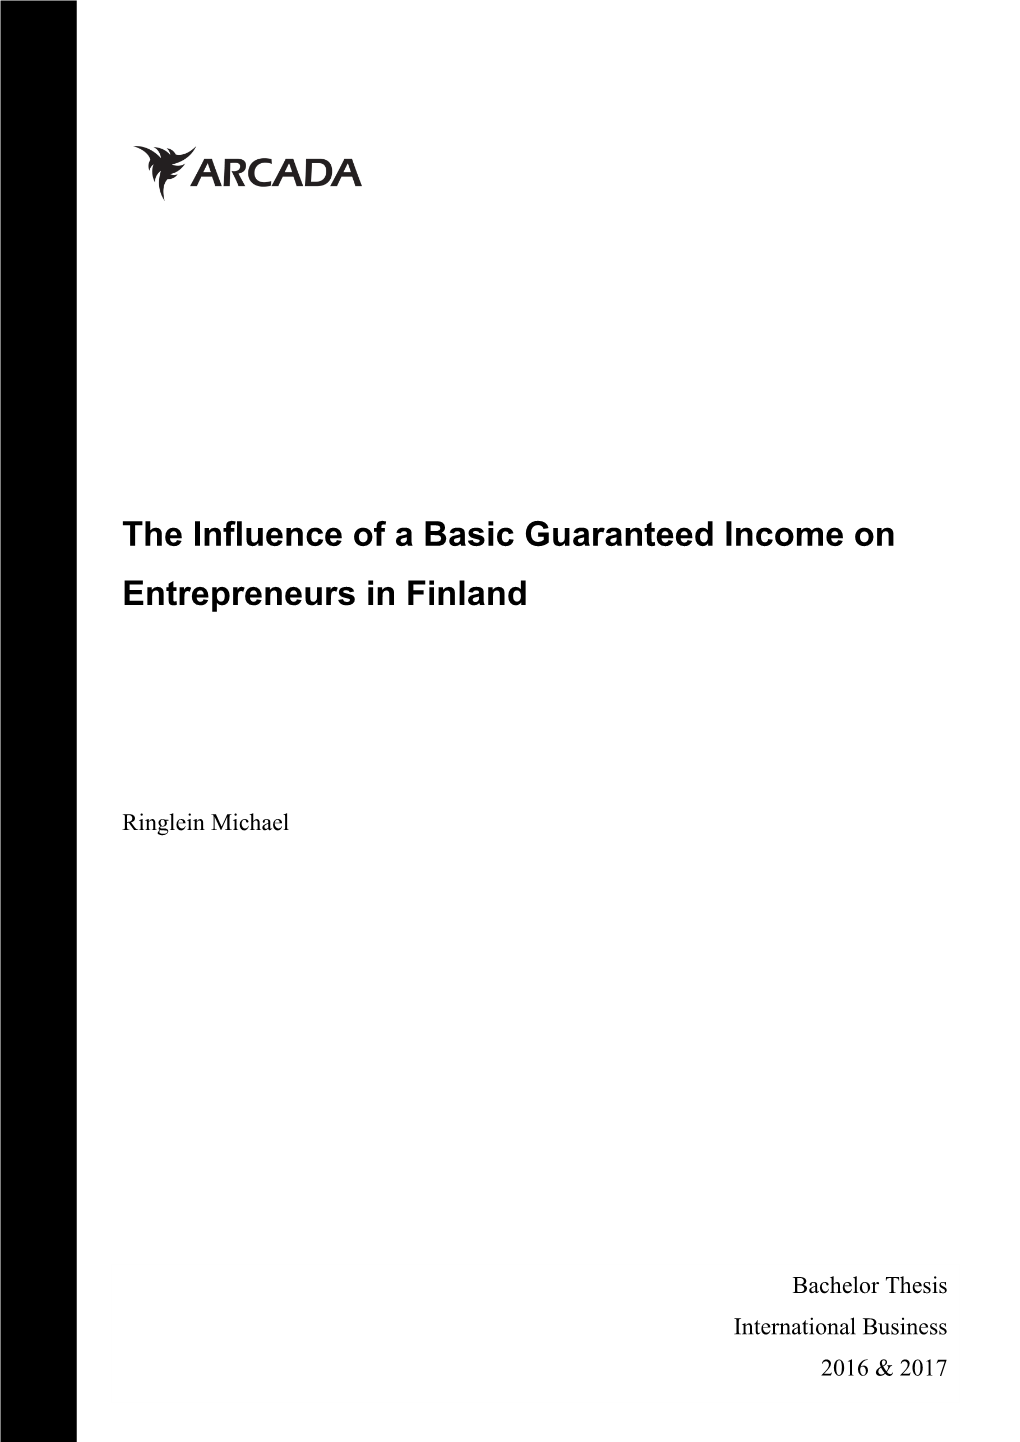 The Influence of a Basic Guaranteed Income on Entrepreneurs in Finland